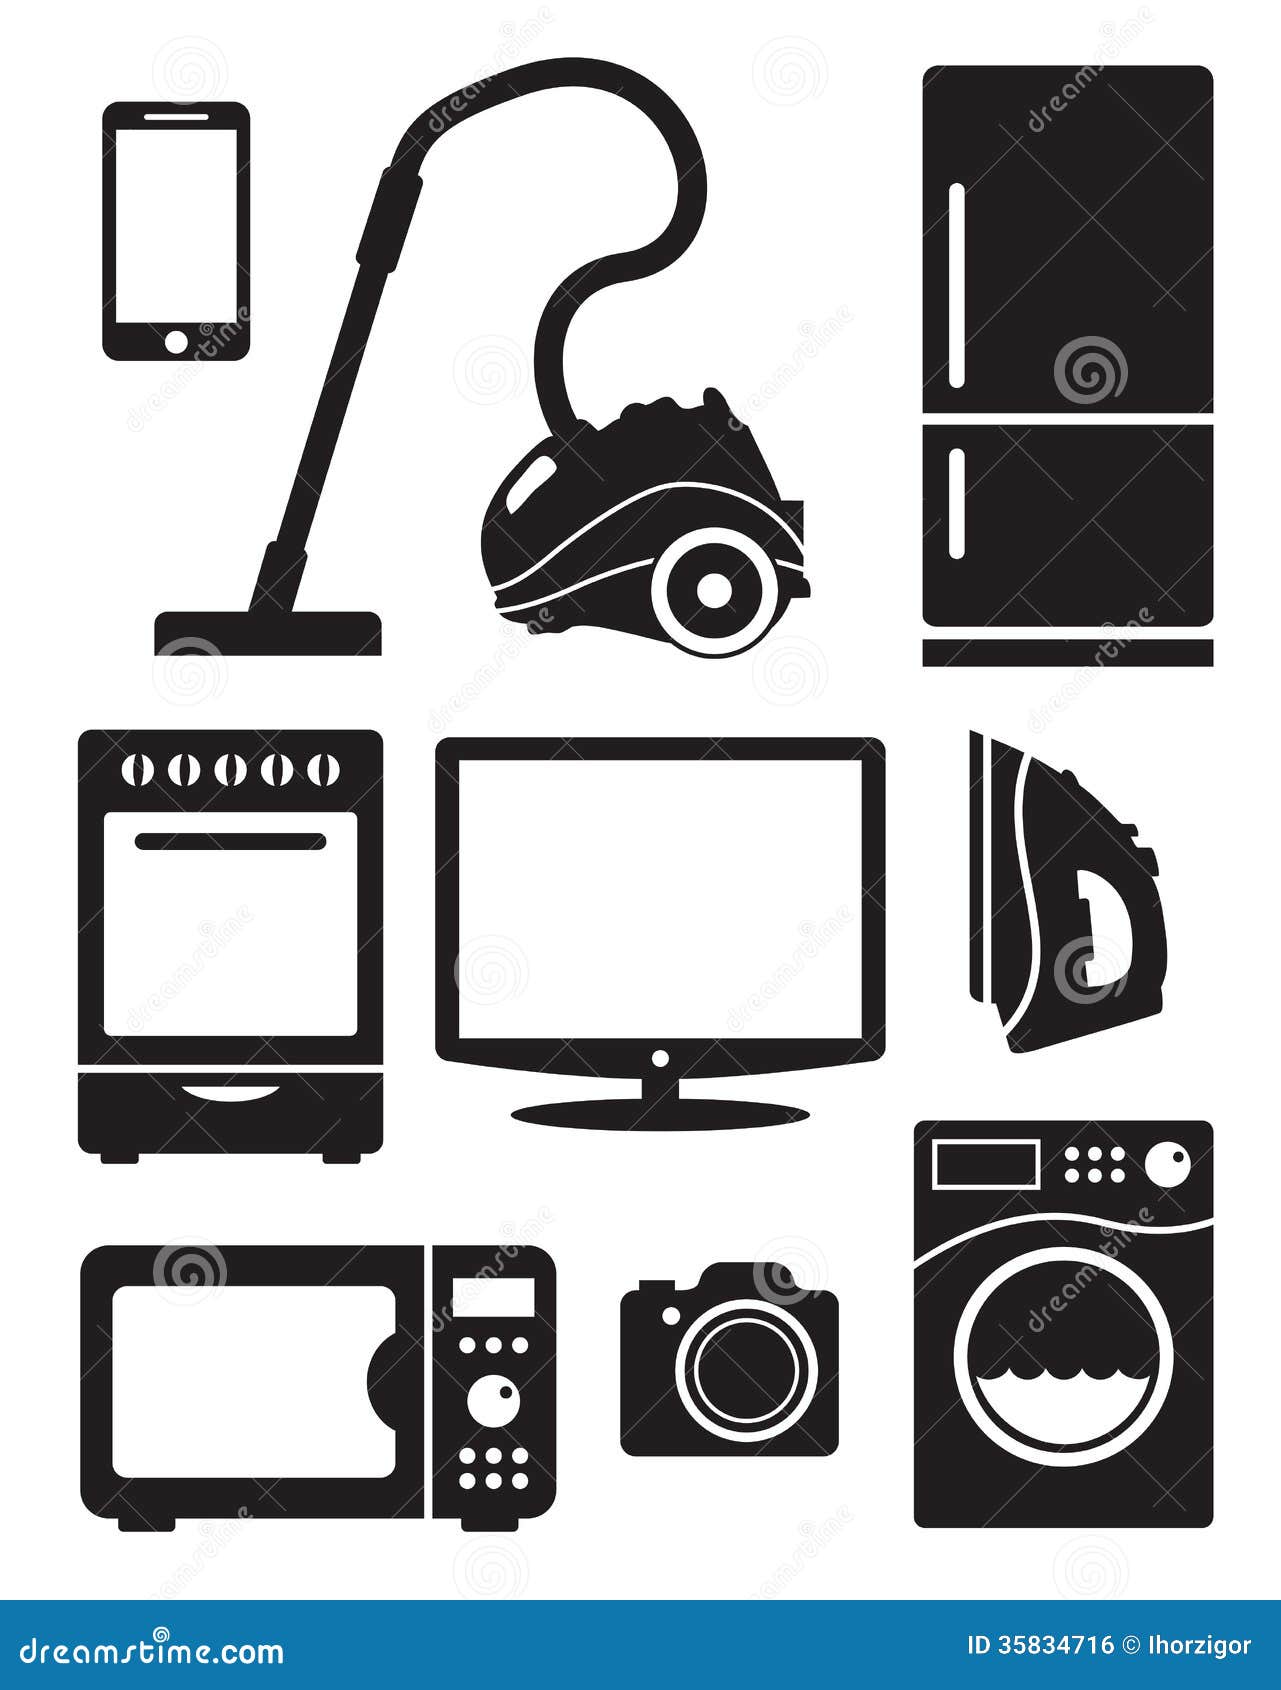 home appliances clipart free download - photo #38